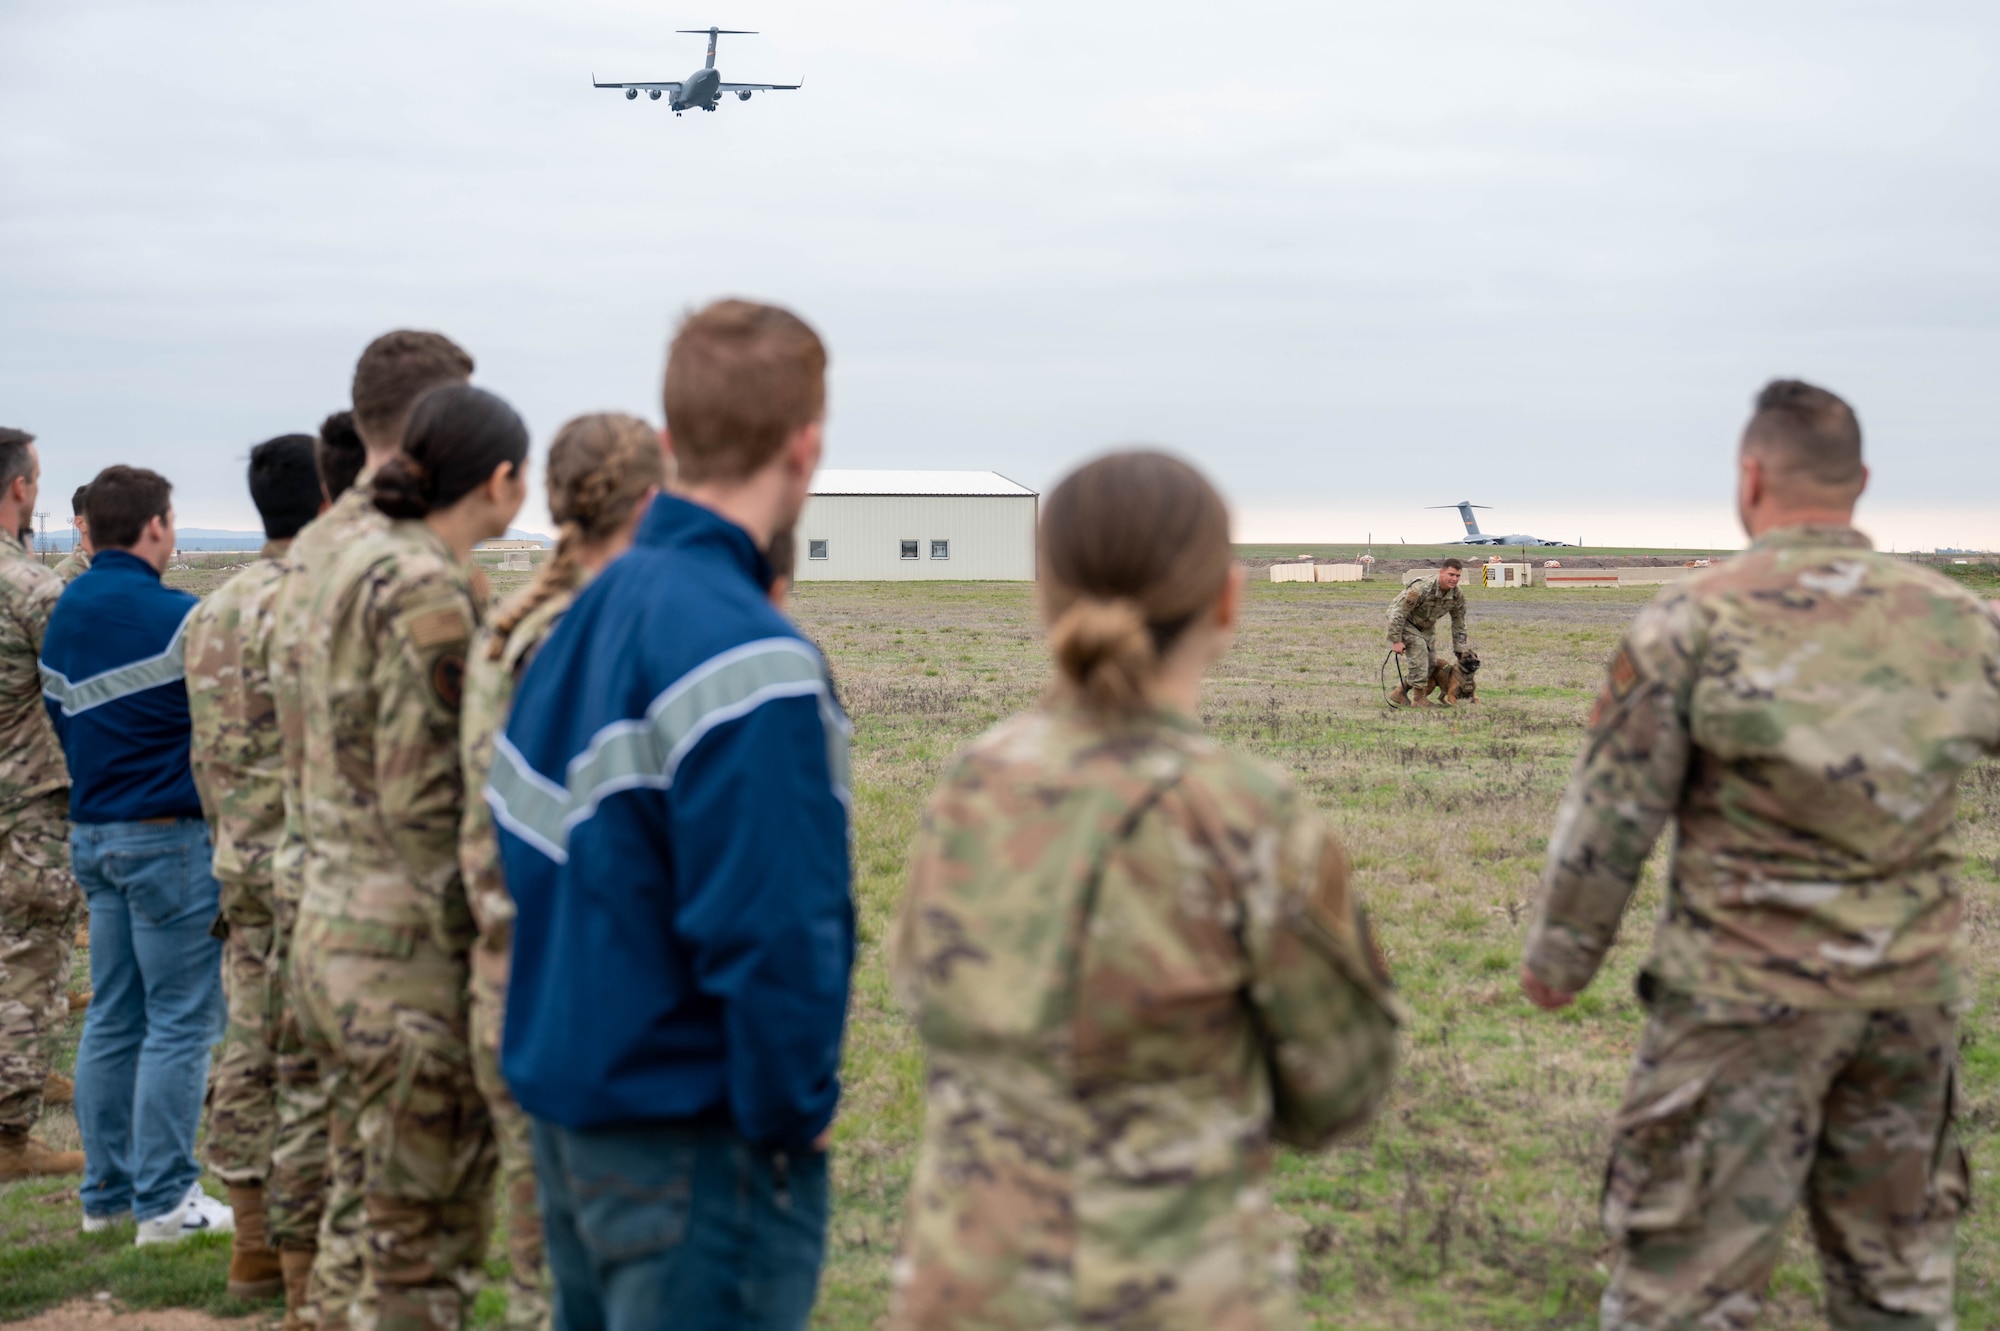 U.S. Air Force Staff Sgt. Donavan Saona, 97th Security Forces Squadron Military Working Dog (MWD) handler, demonstrates a MWD exercise to Air Force ROTC cadets from Baylor University during a tour at Altus Air Force Base, Oklahoma, March 15, 2024. The cadets got to see first-hand how the 97th Air Mobility Wing trains exceptional mobility Airmen. (U.S. Air Force photo by Airman 1st Class Heidi Bucins)